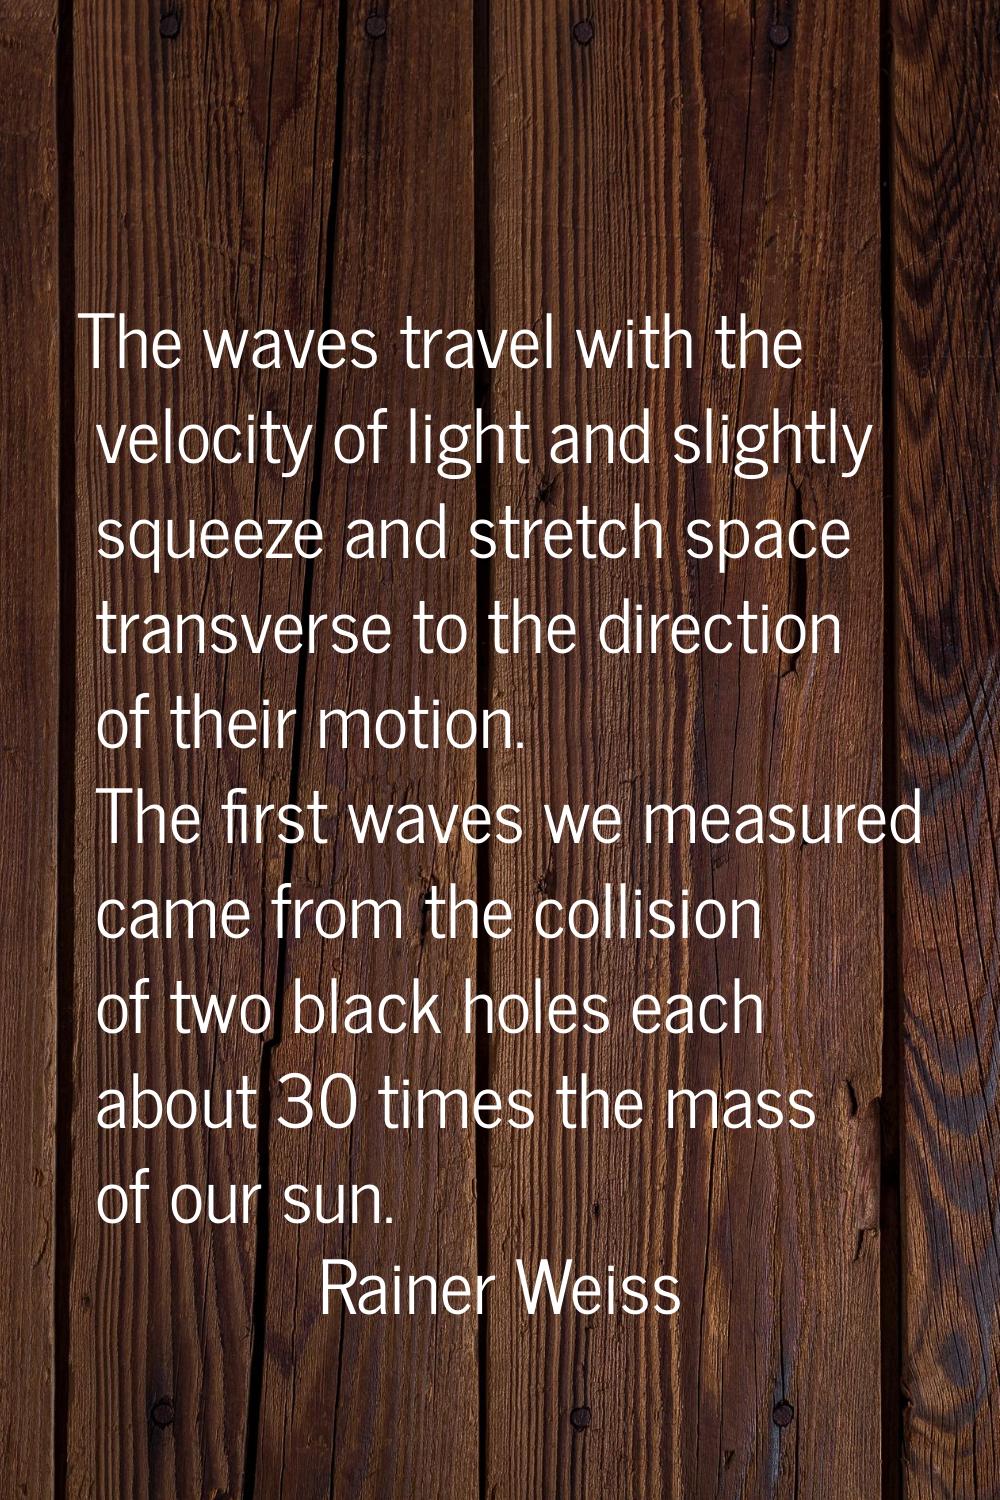 The waves travel with the velocity of light and slightly squeeze and stretch space transverse to th